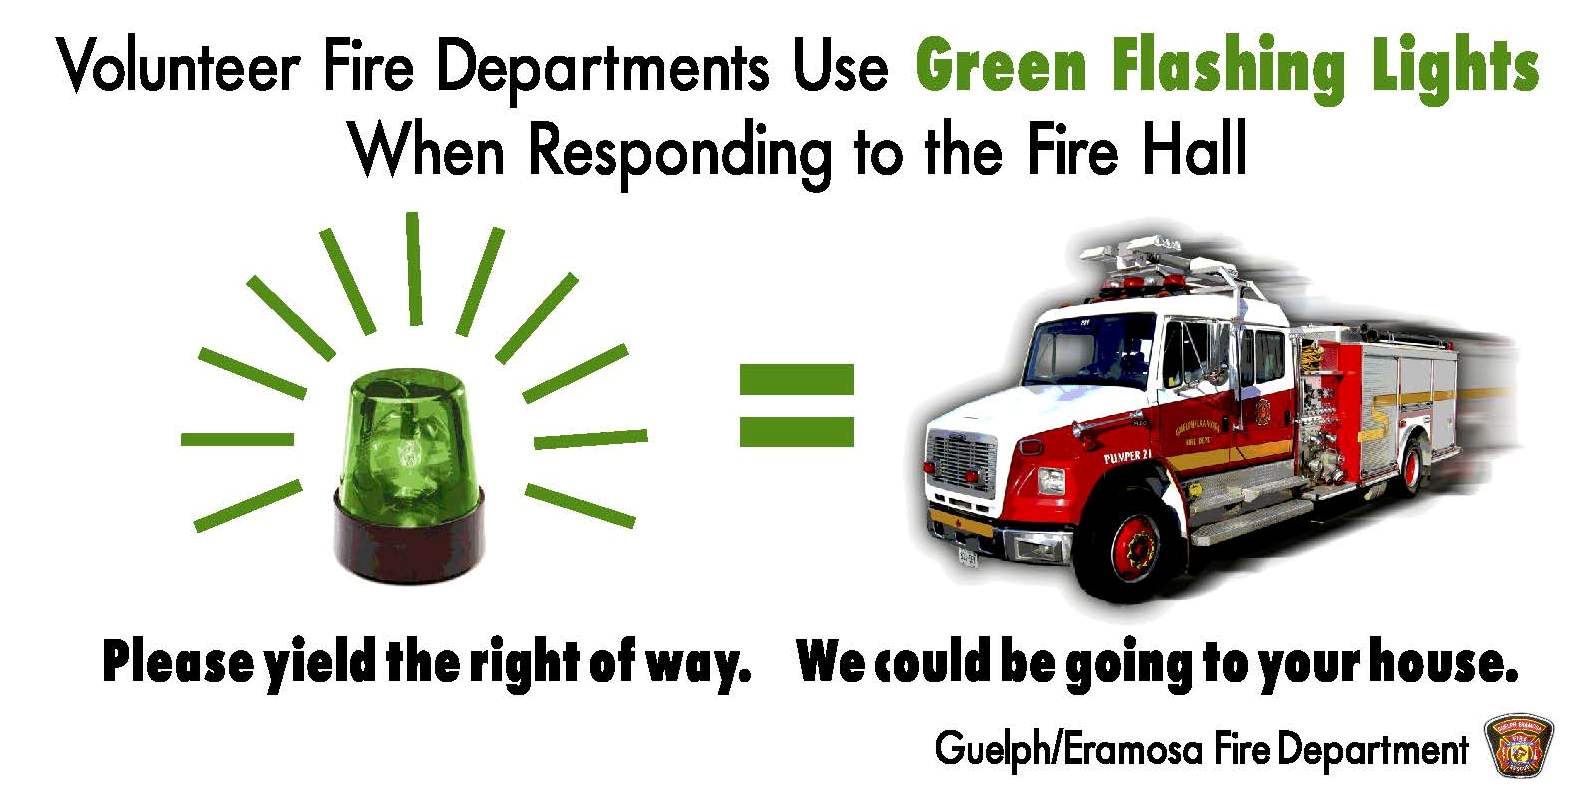 An image indicating that drivers should yield to a green light on a volunteer fire fighters vehicle, which they use to respond to calls